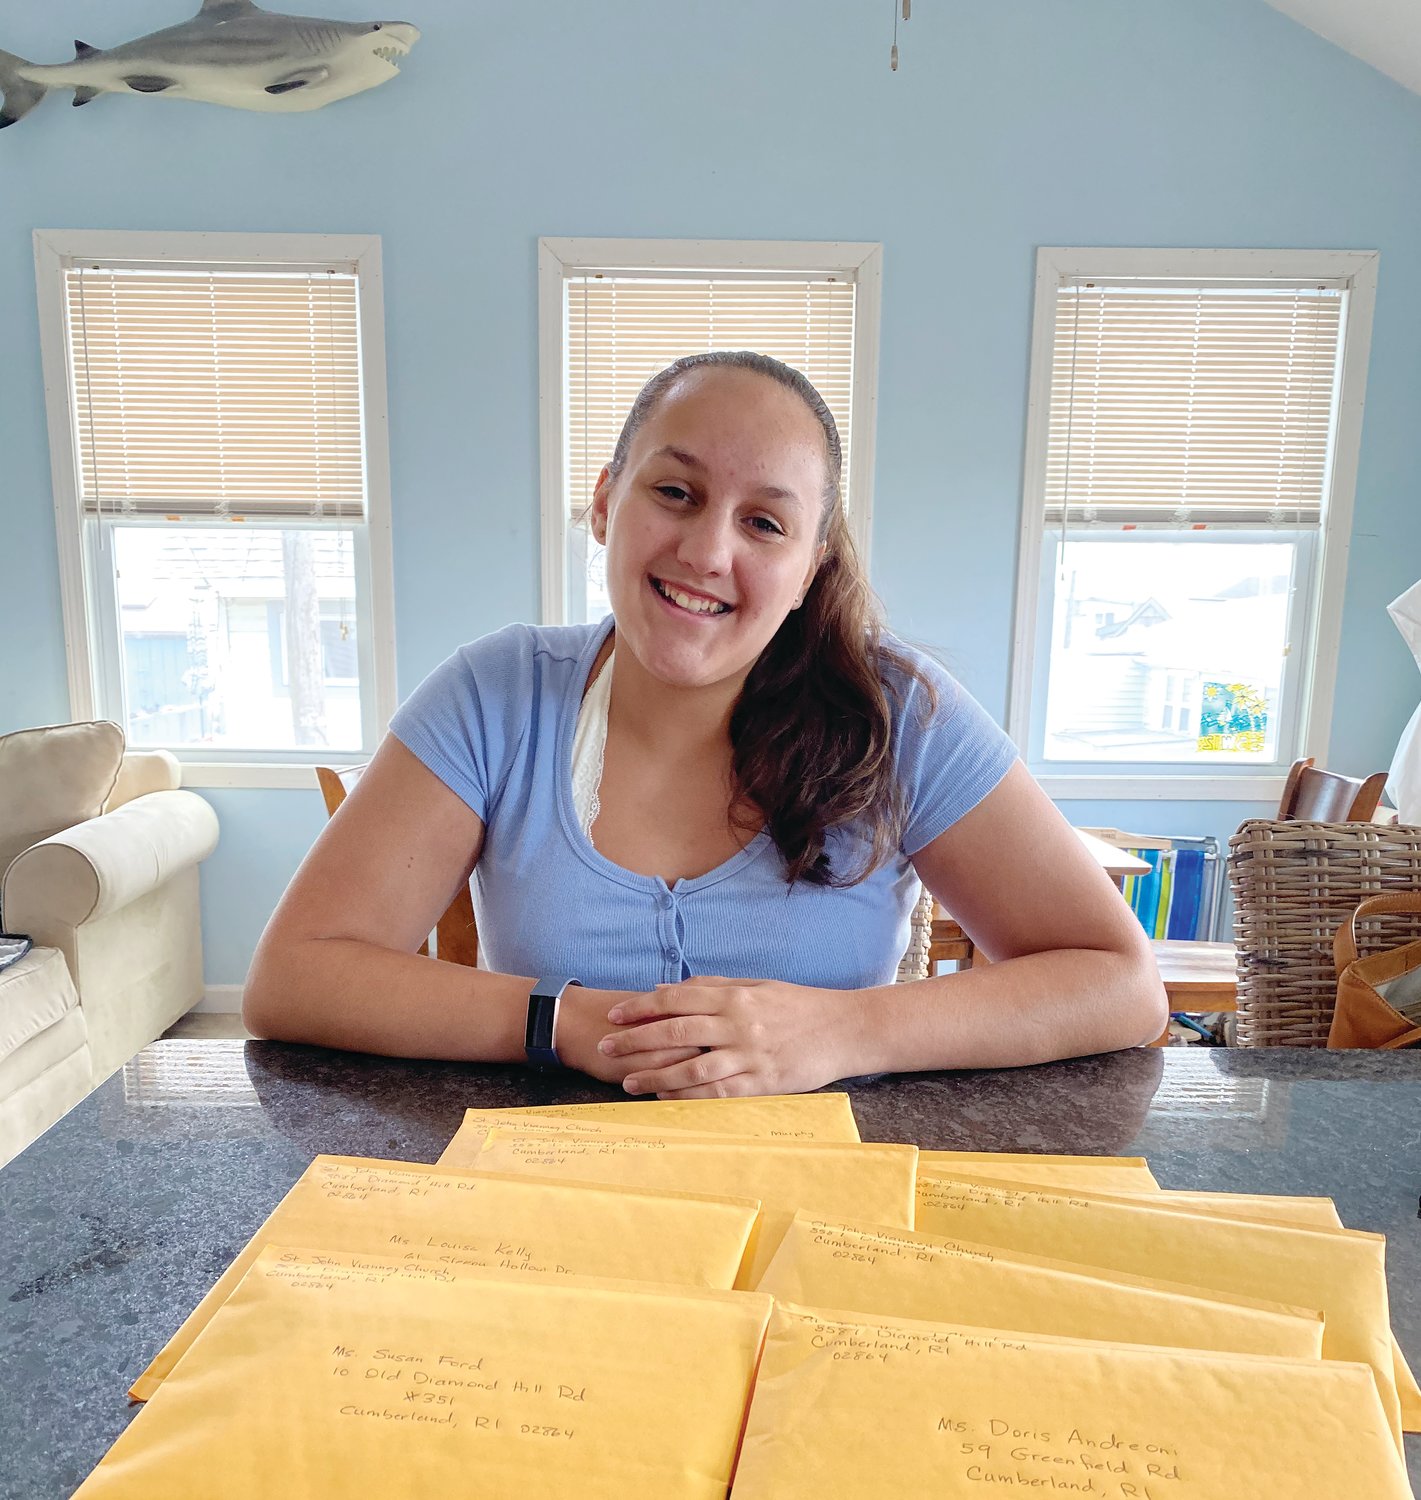 Teens from St. John Vianney Church Youth Ministry send out cards and letters to more than 200 parishioners as a loving reminder that they are keeping them in prayer.